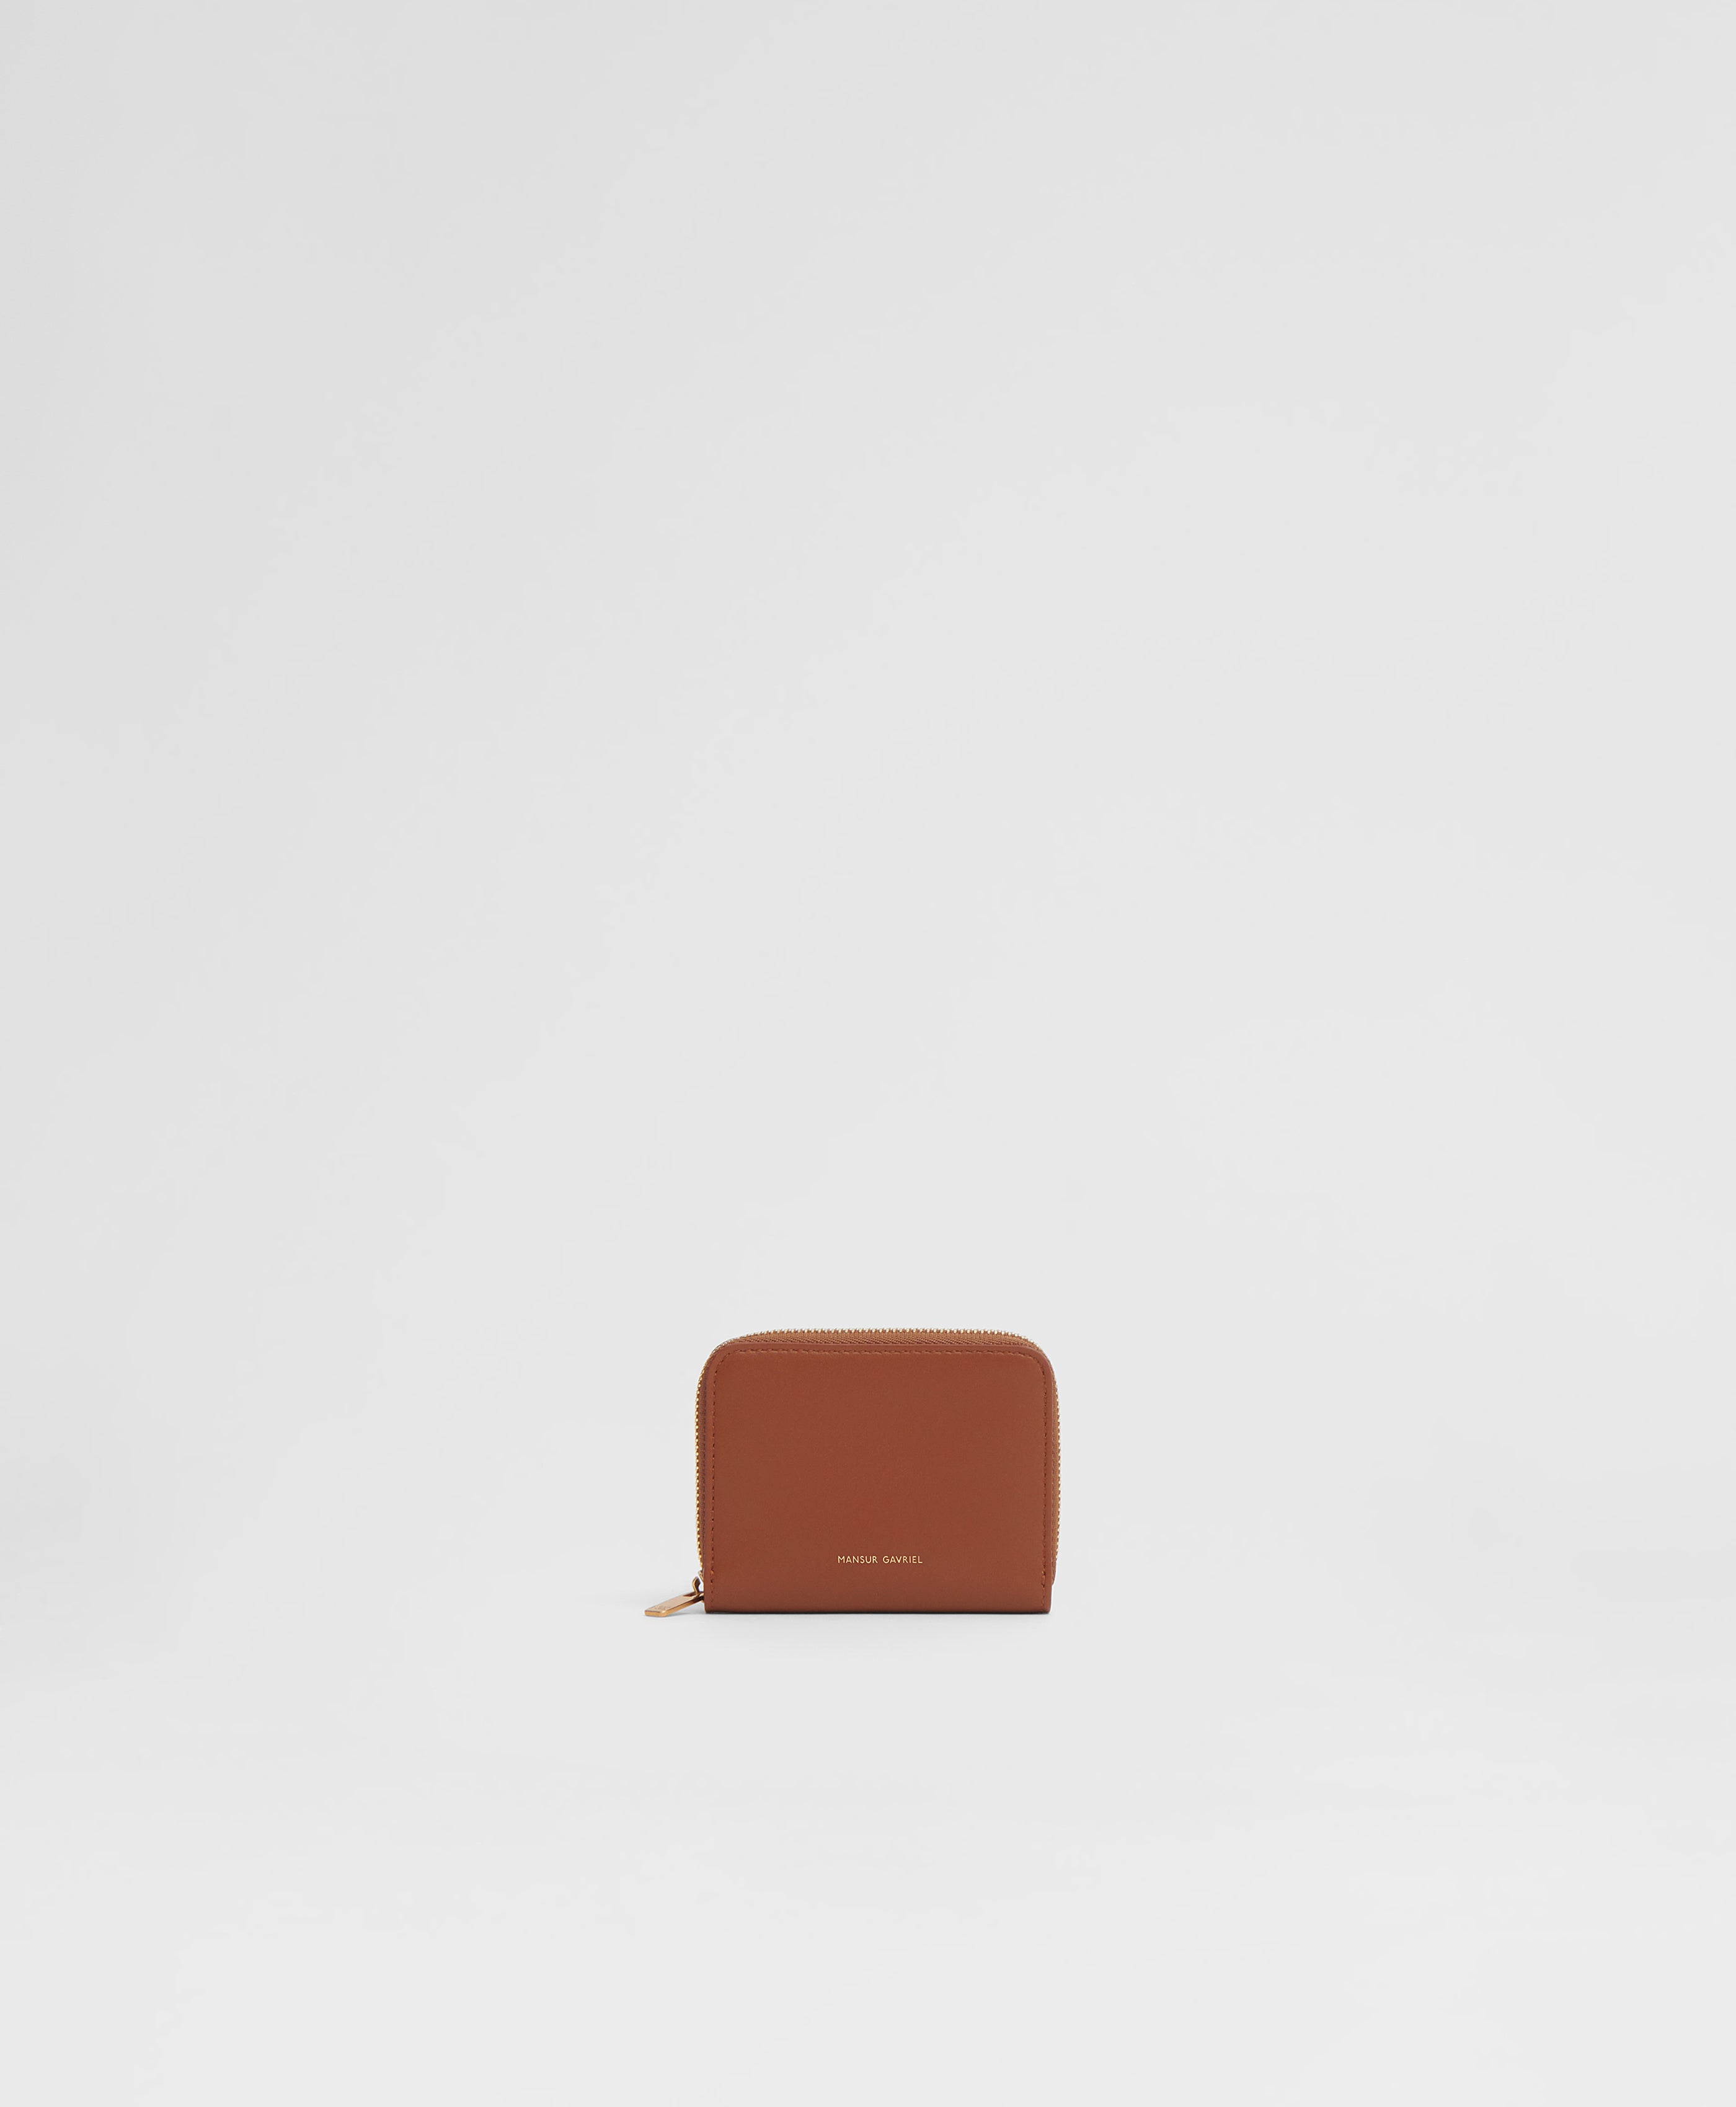 Mansur Gavriel Leather Care: Leather Conditioners and Protectors